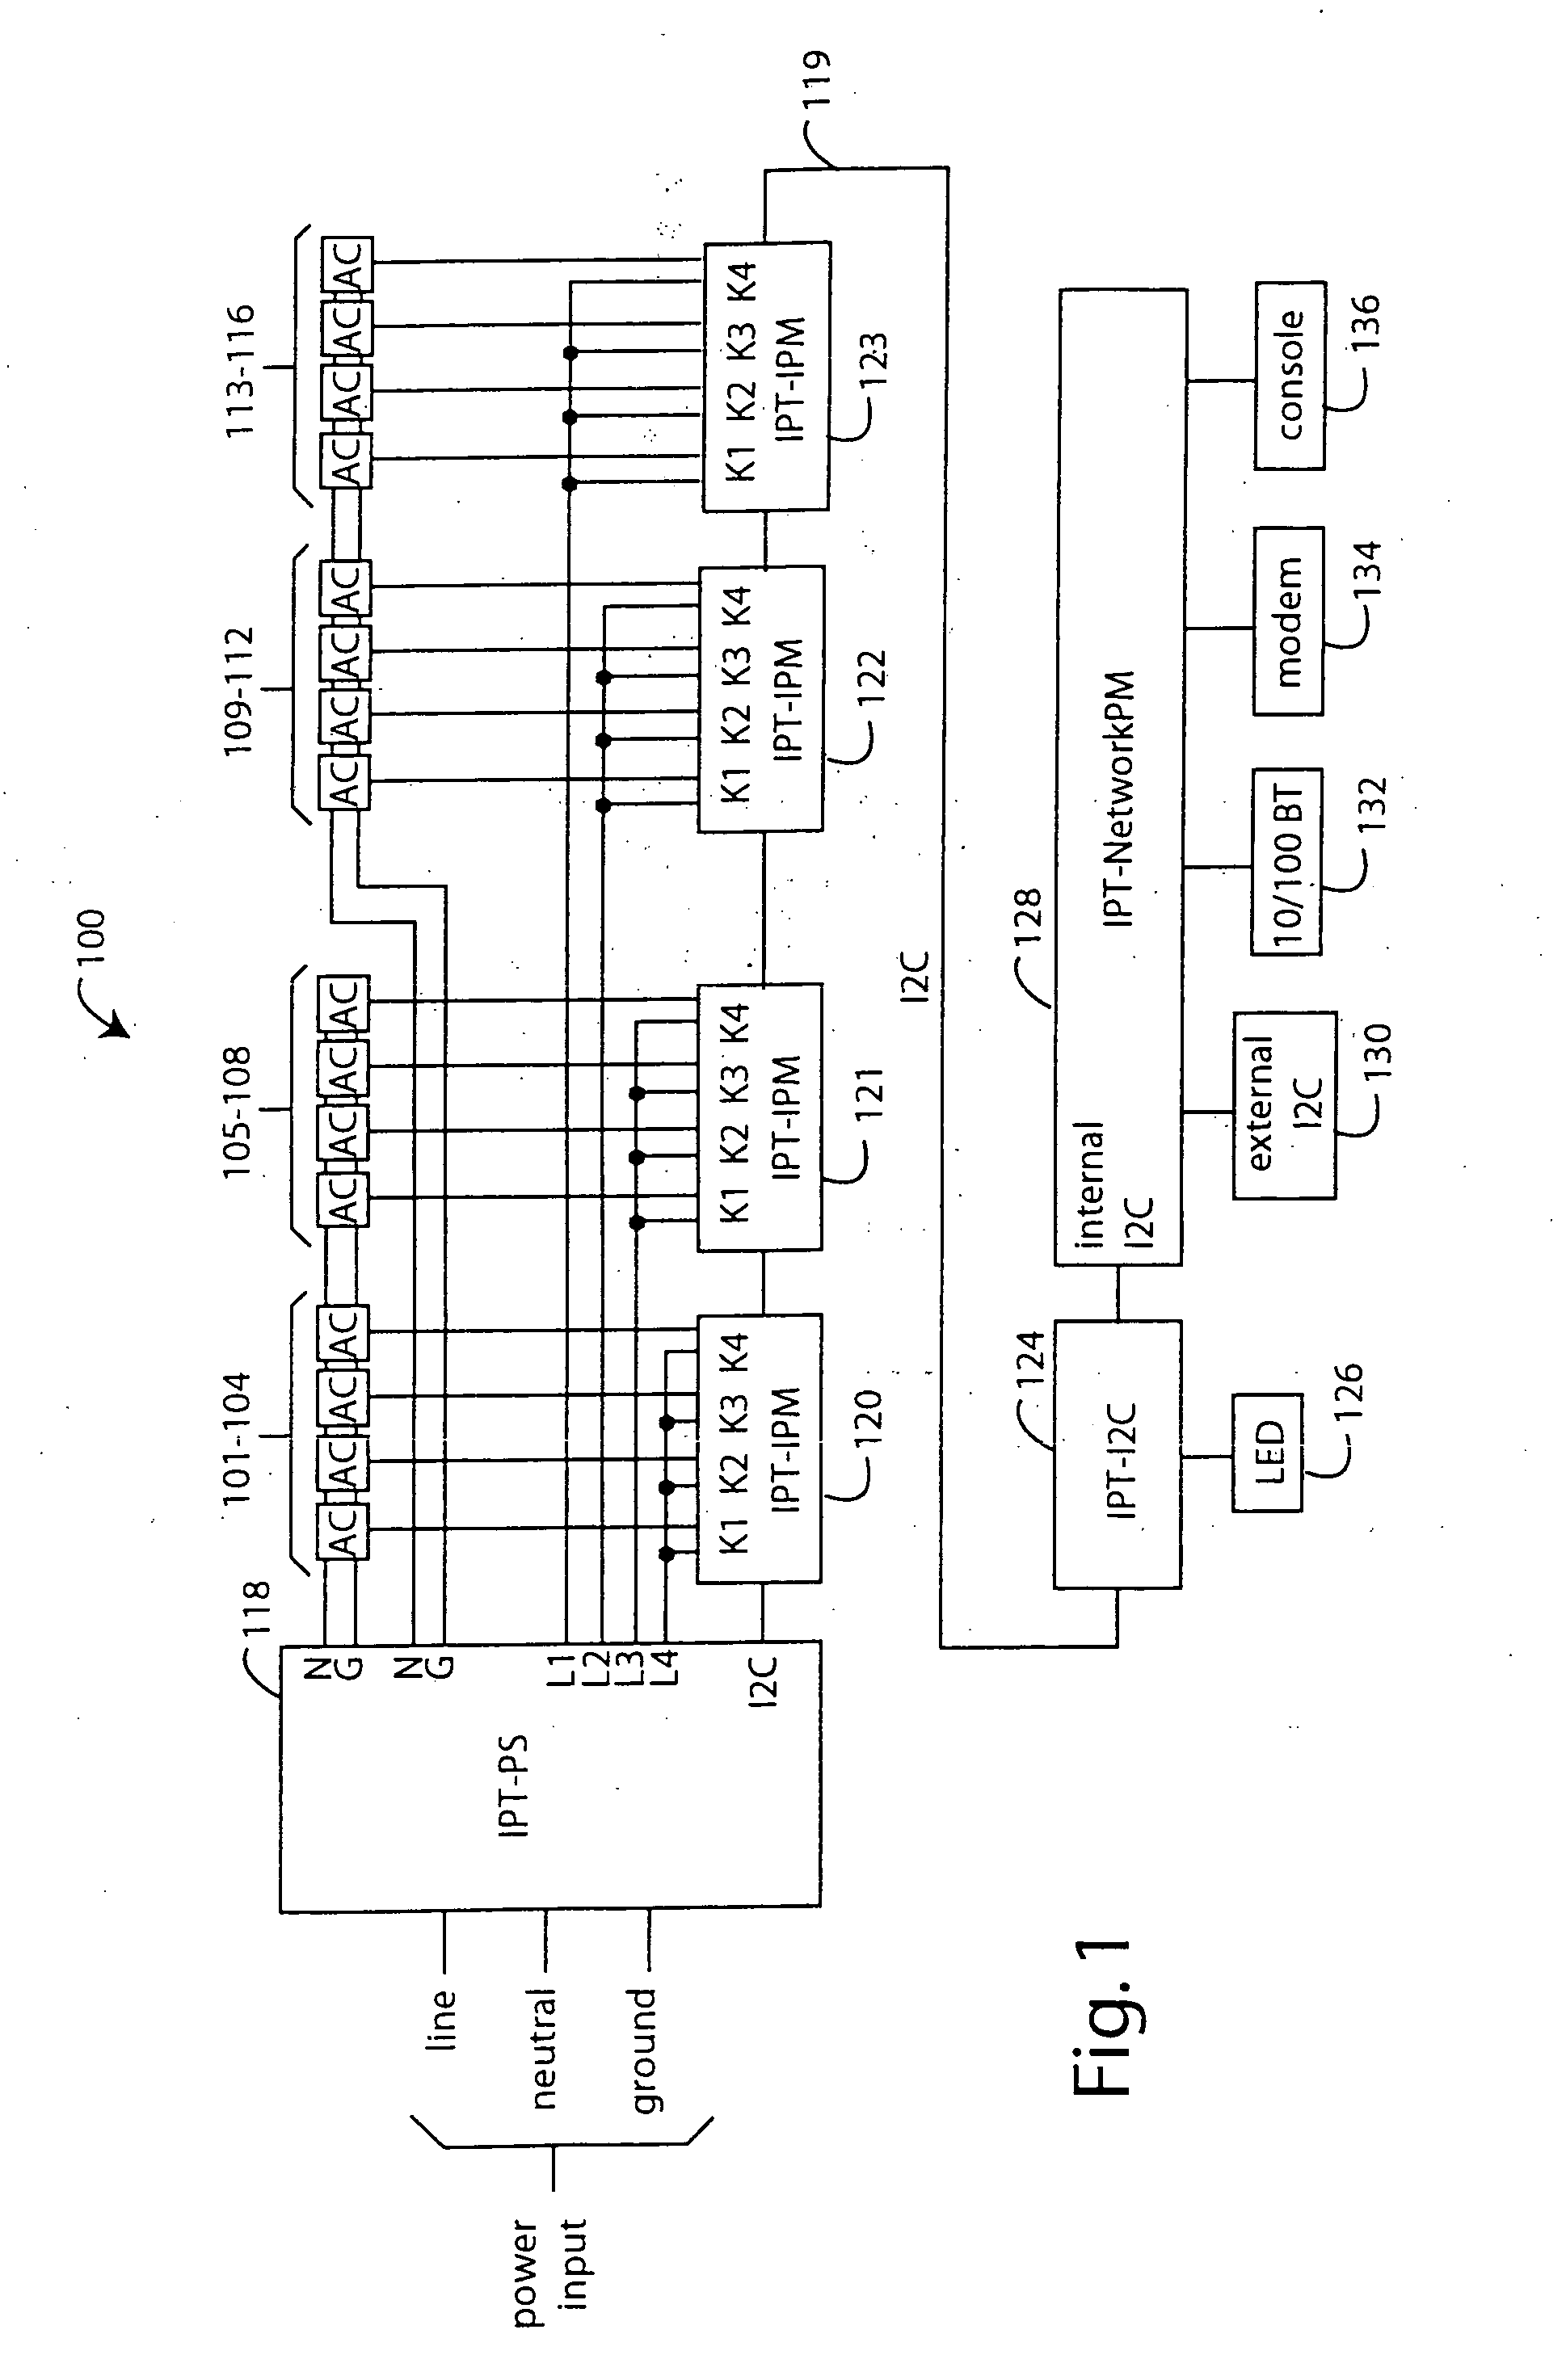 Network power administration system